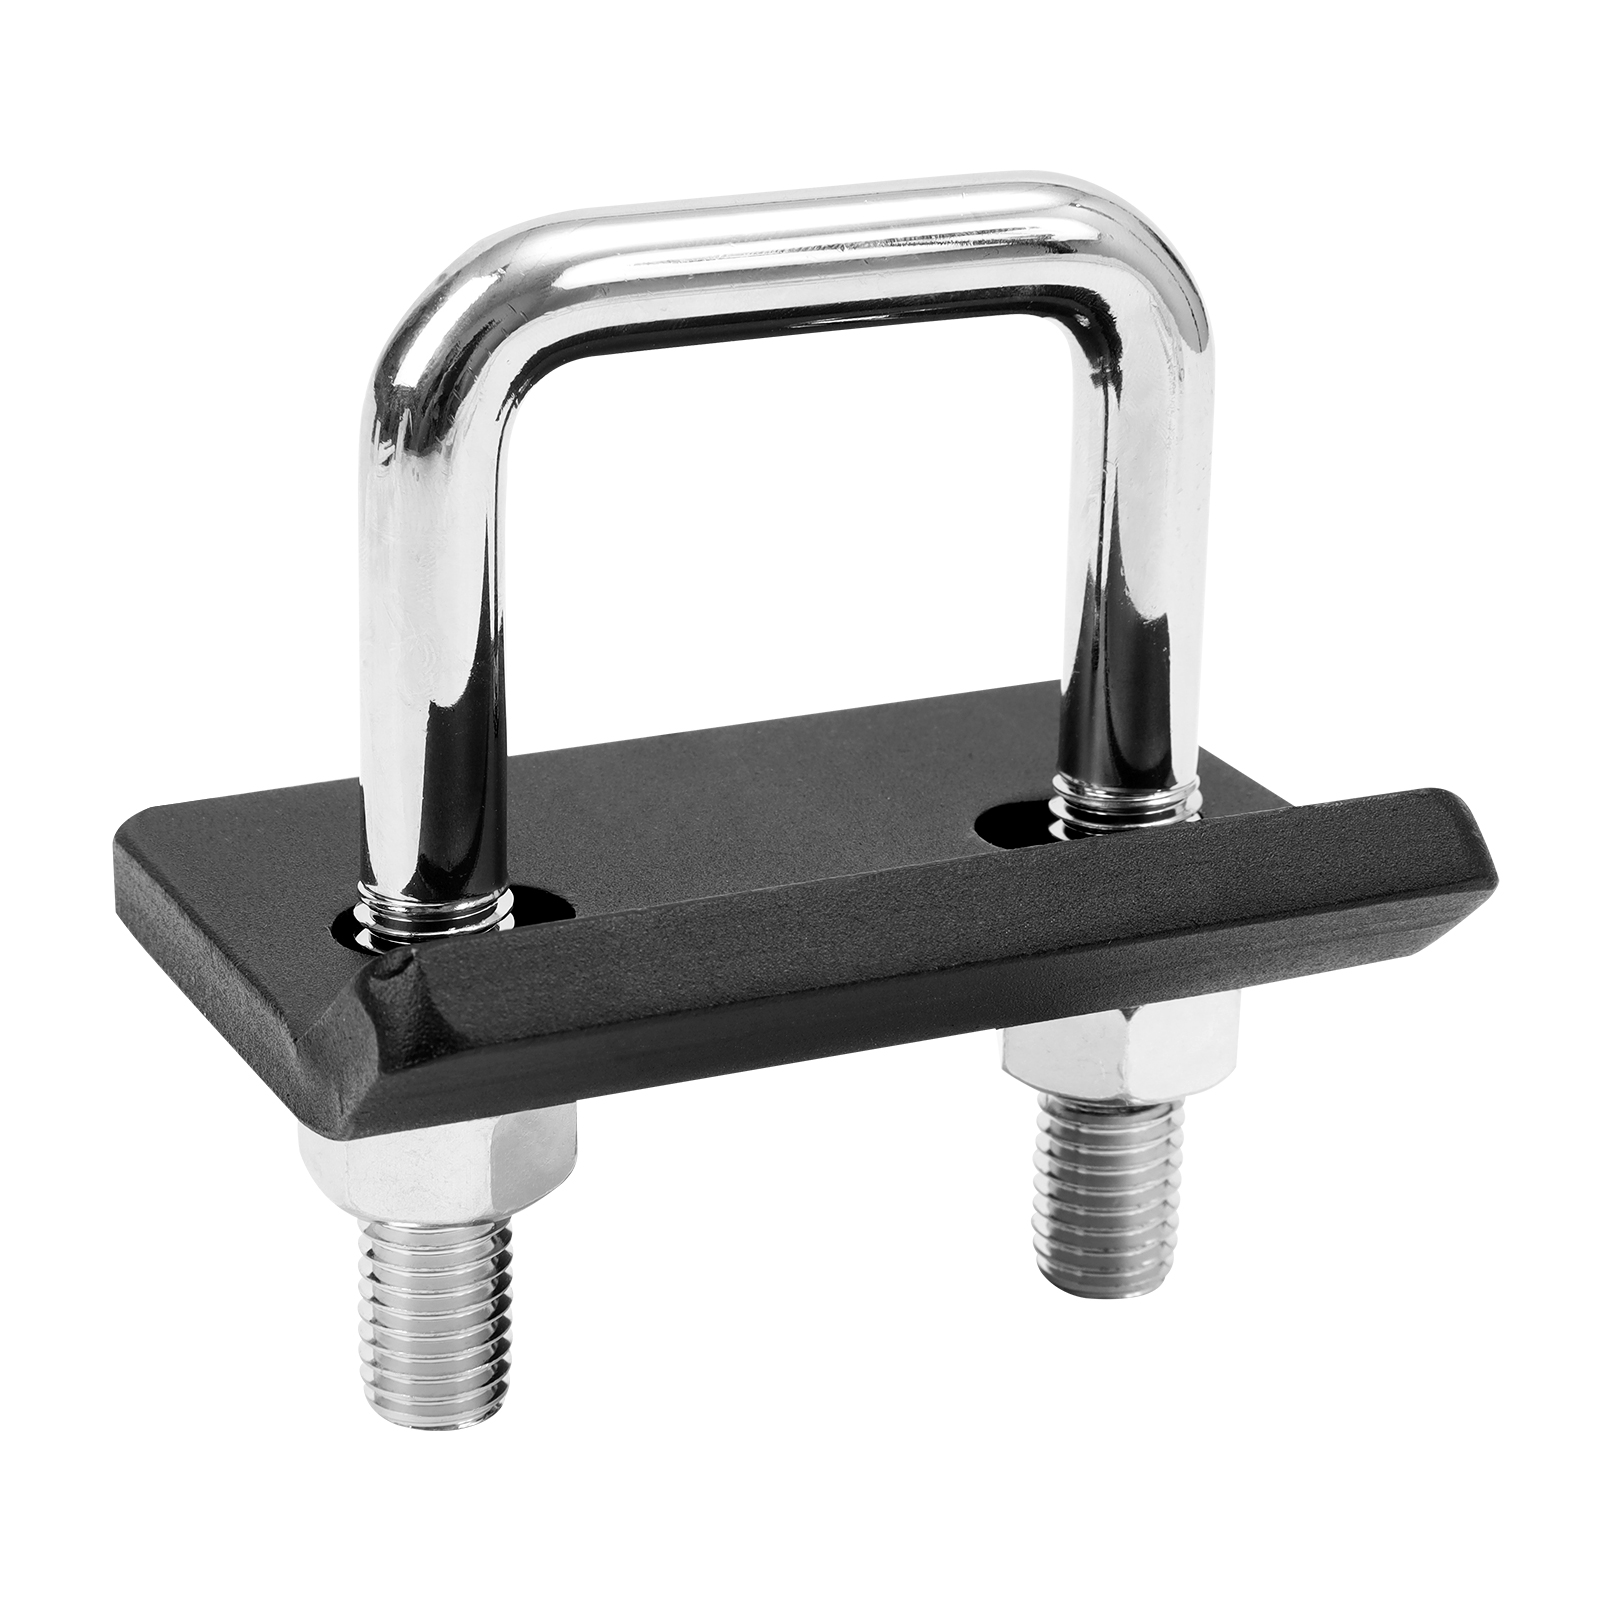 Hitch Tightener for 1.25″ and 2″ Hitches, Heavy Duty Steel Anti-Rattle Stabilizer